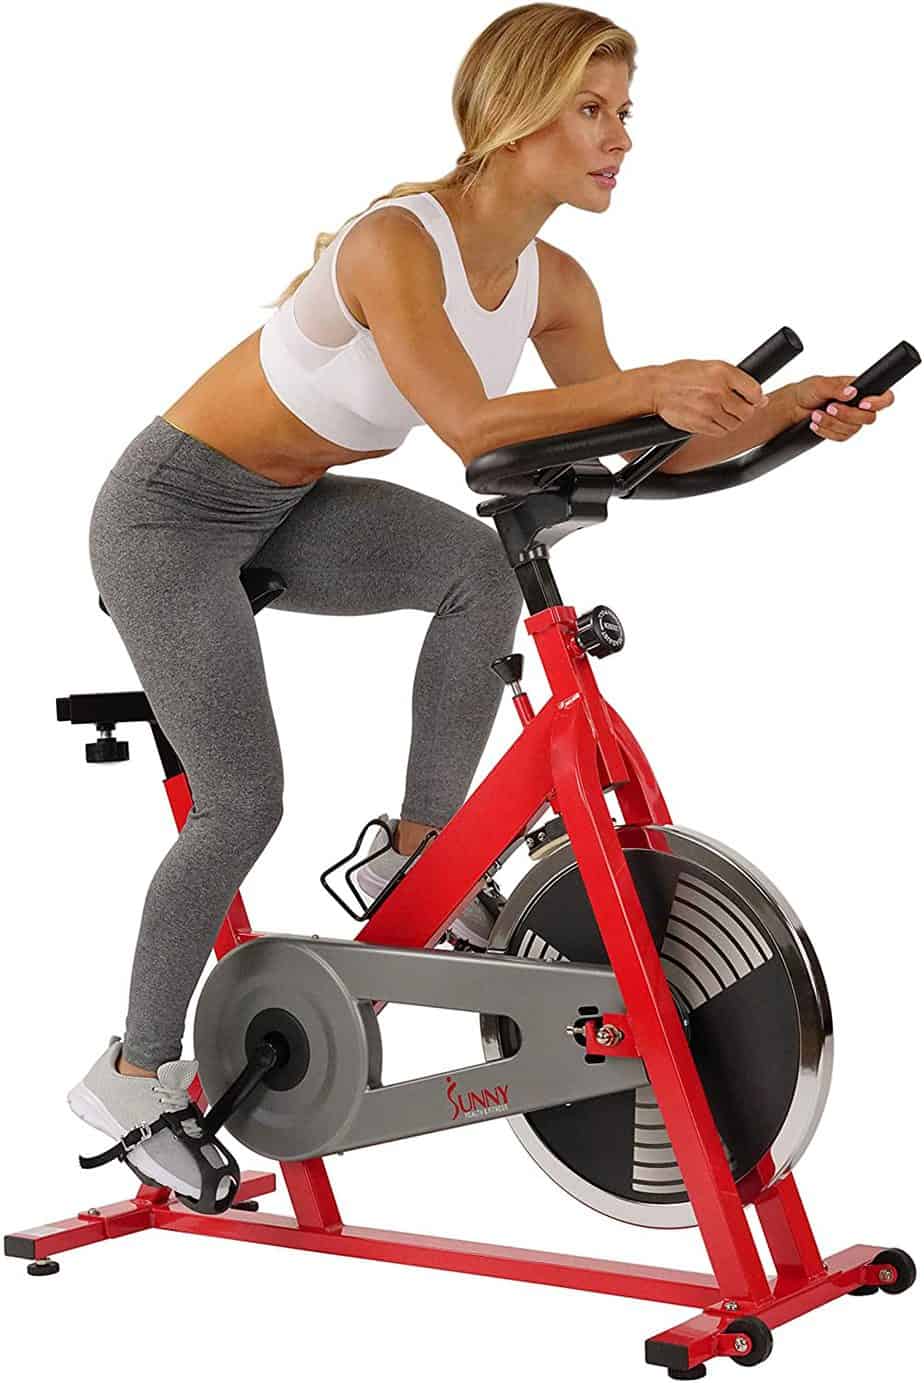 A lady is exercising with the Sunny Health and Fitness SF-B1001 Indoor Cycling Bike